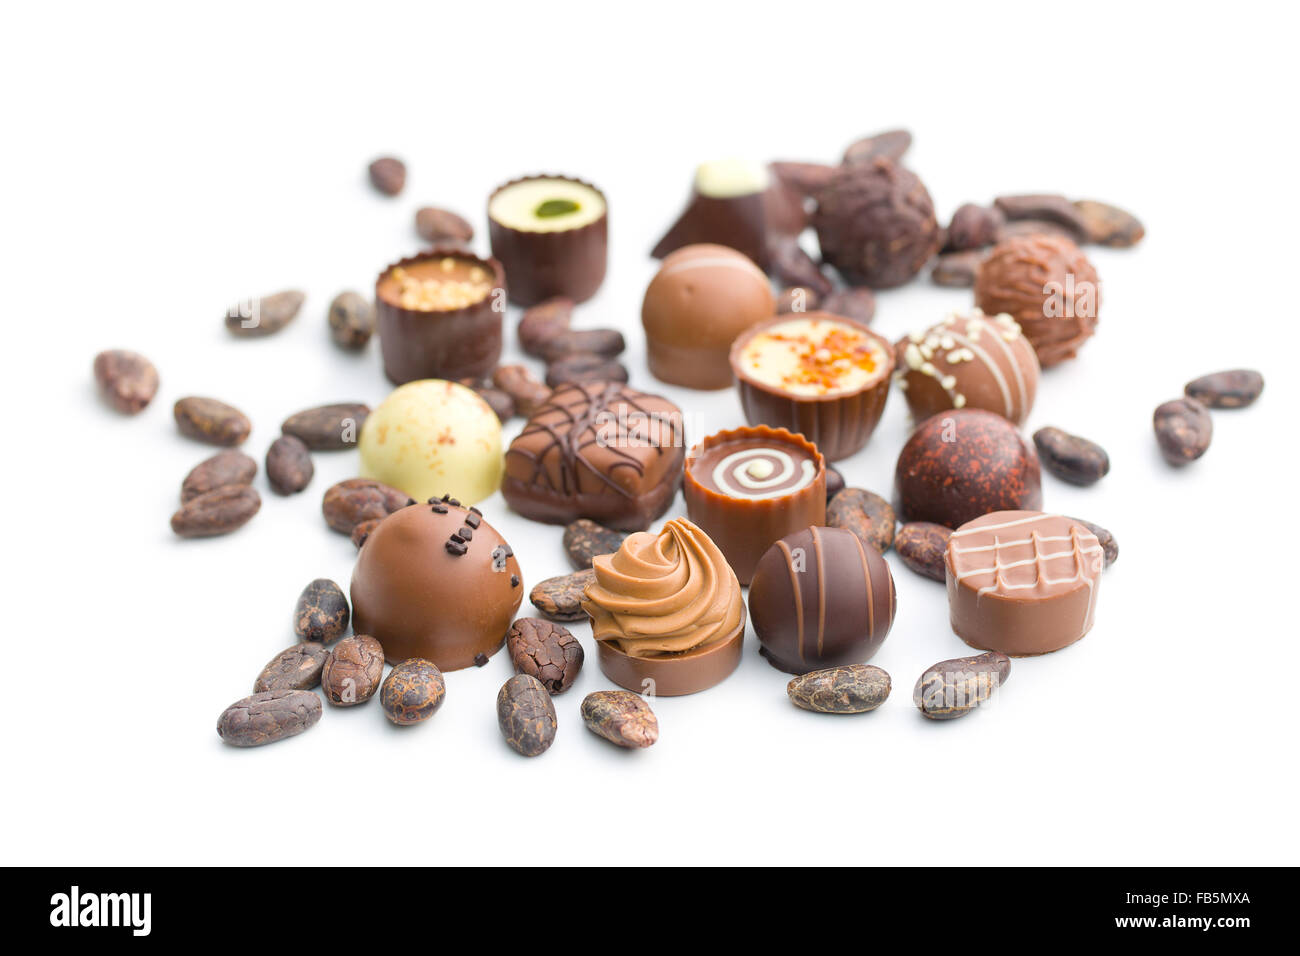 various chocolate pralines and cocoa beans on white background Stock Photo